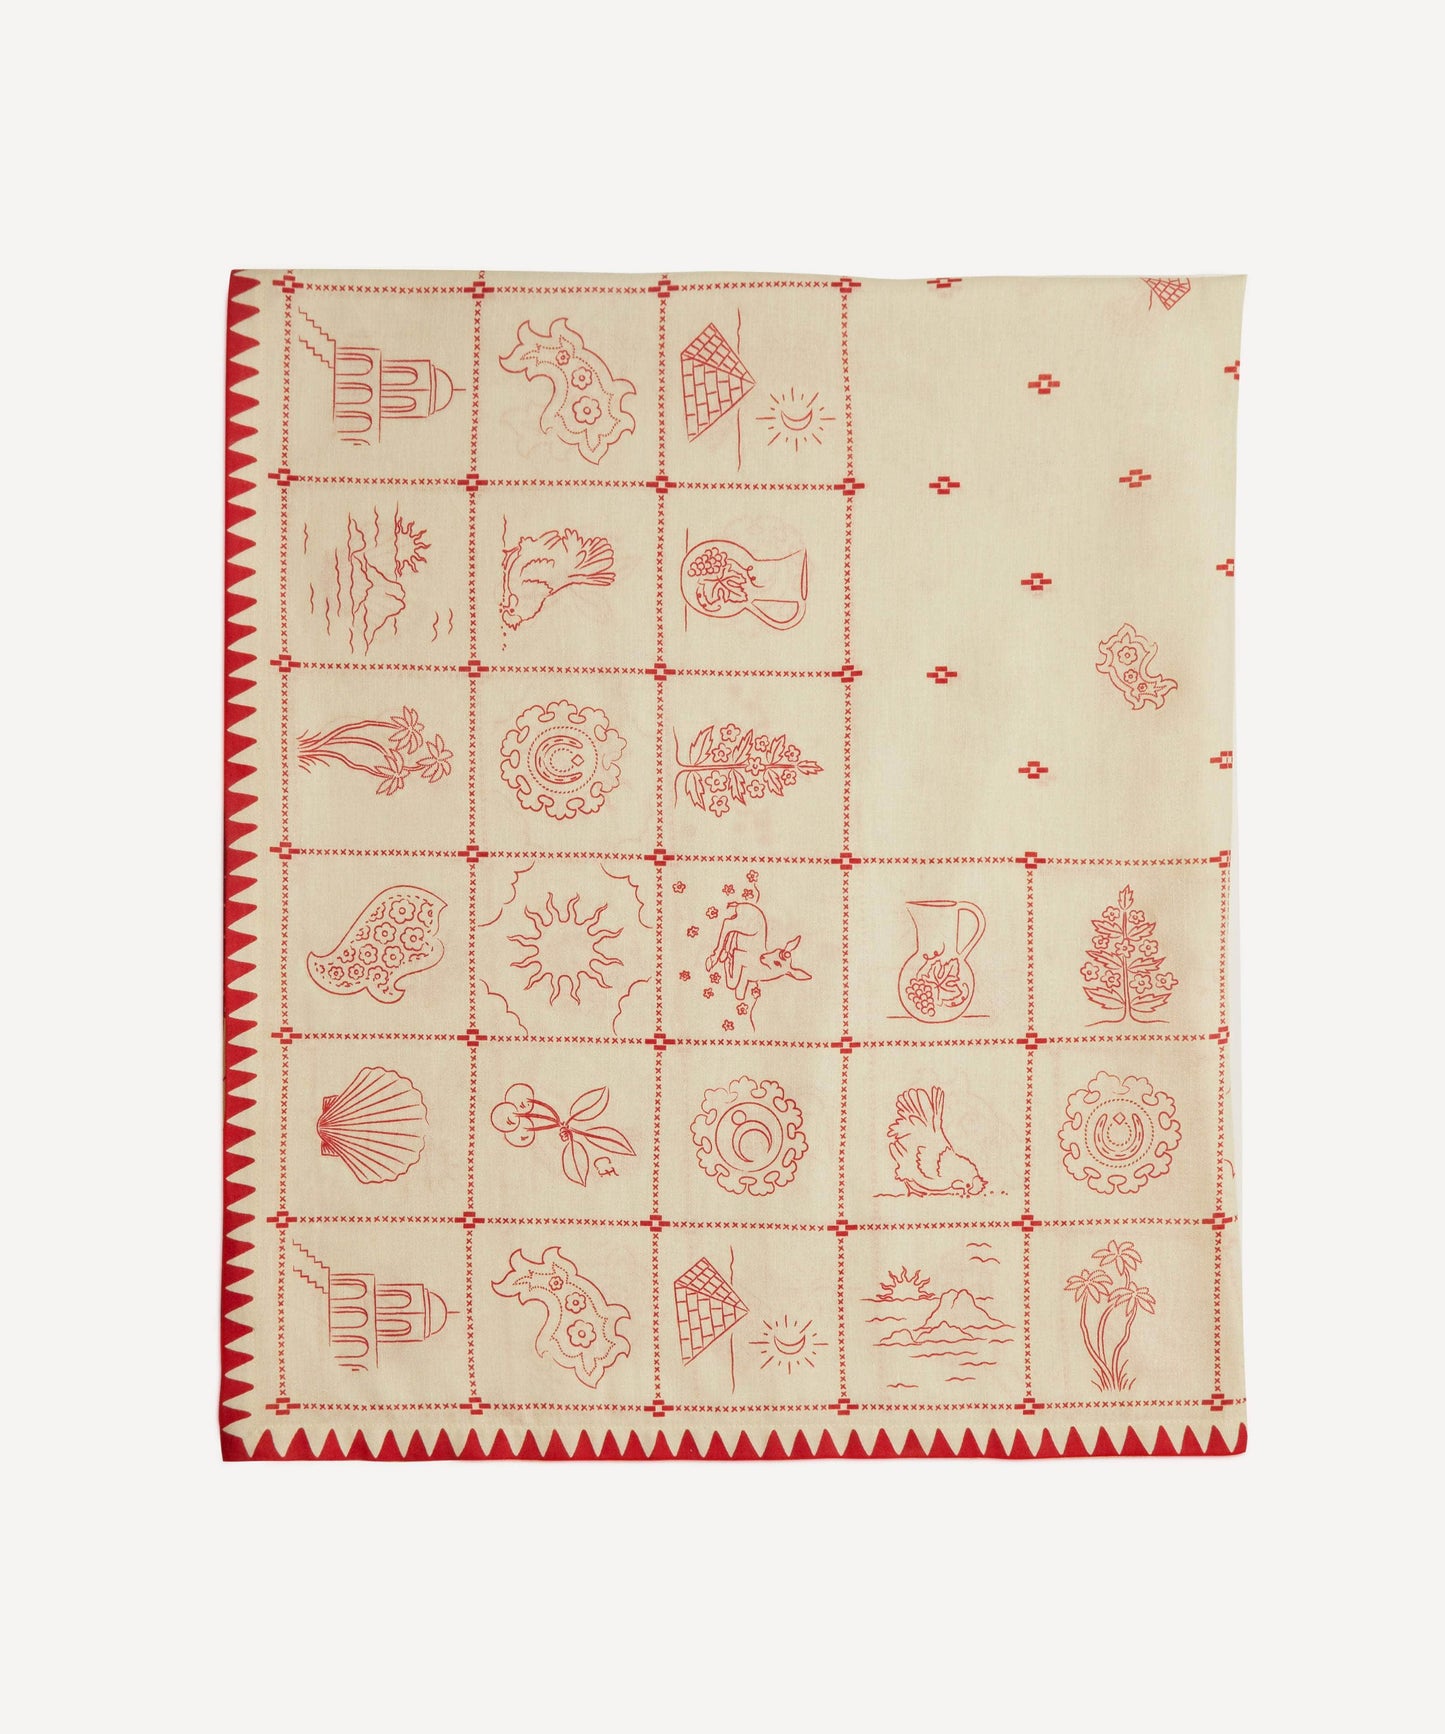 Redwork Tablecloth Red